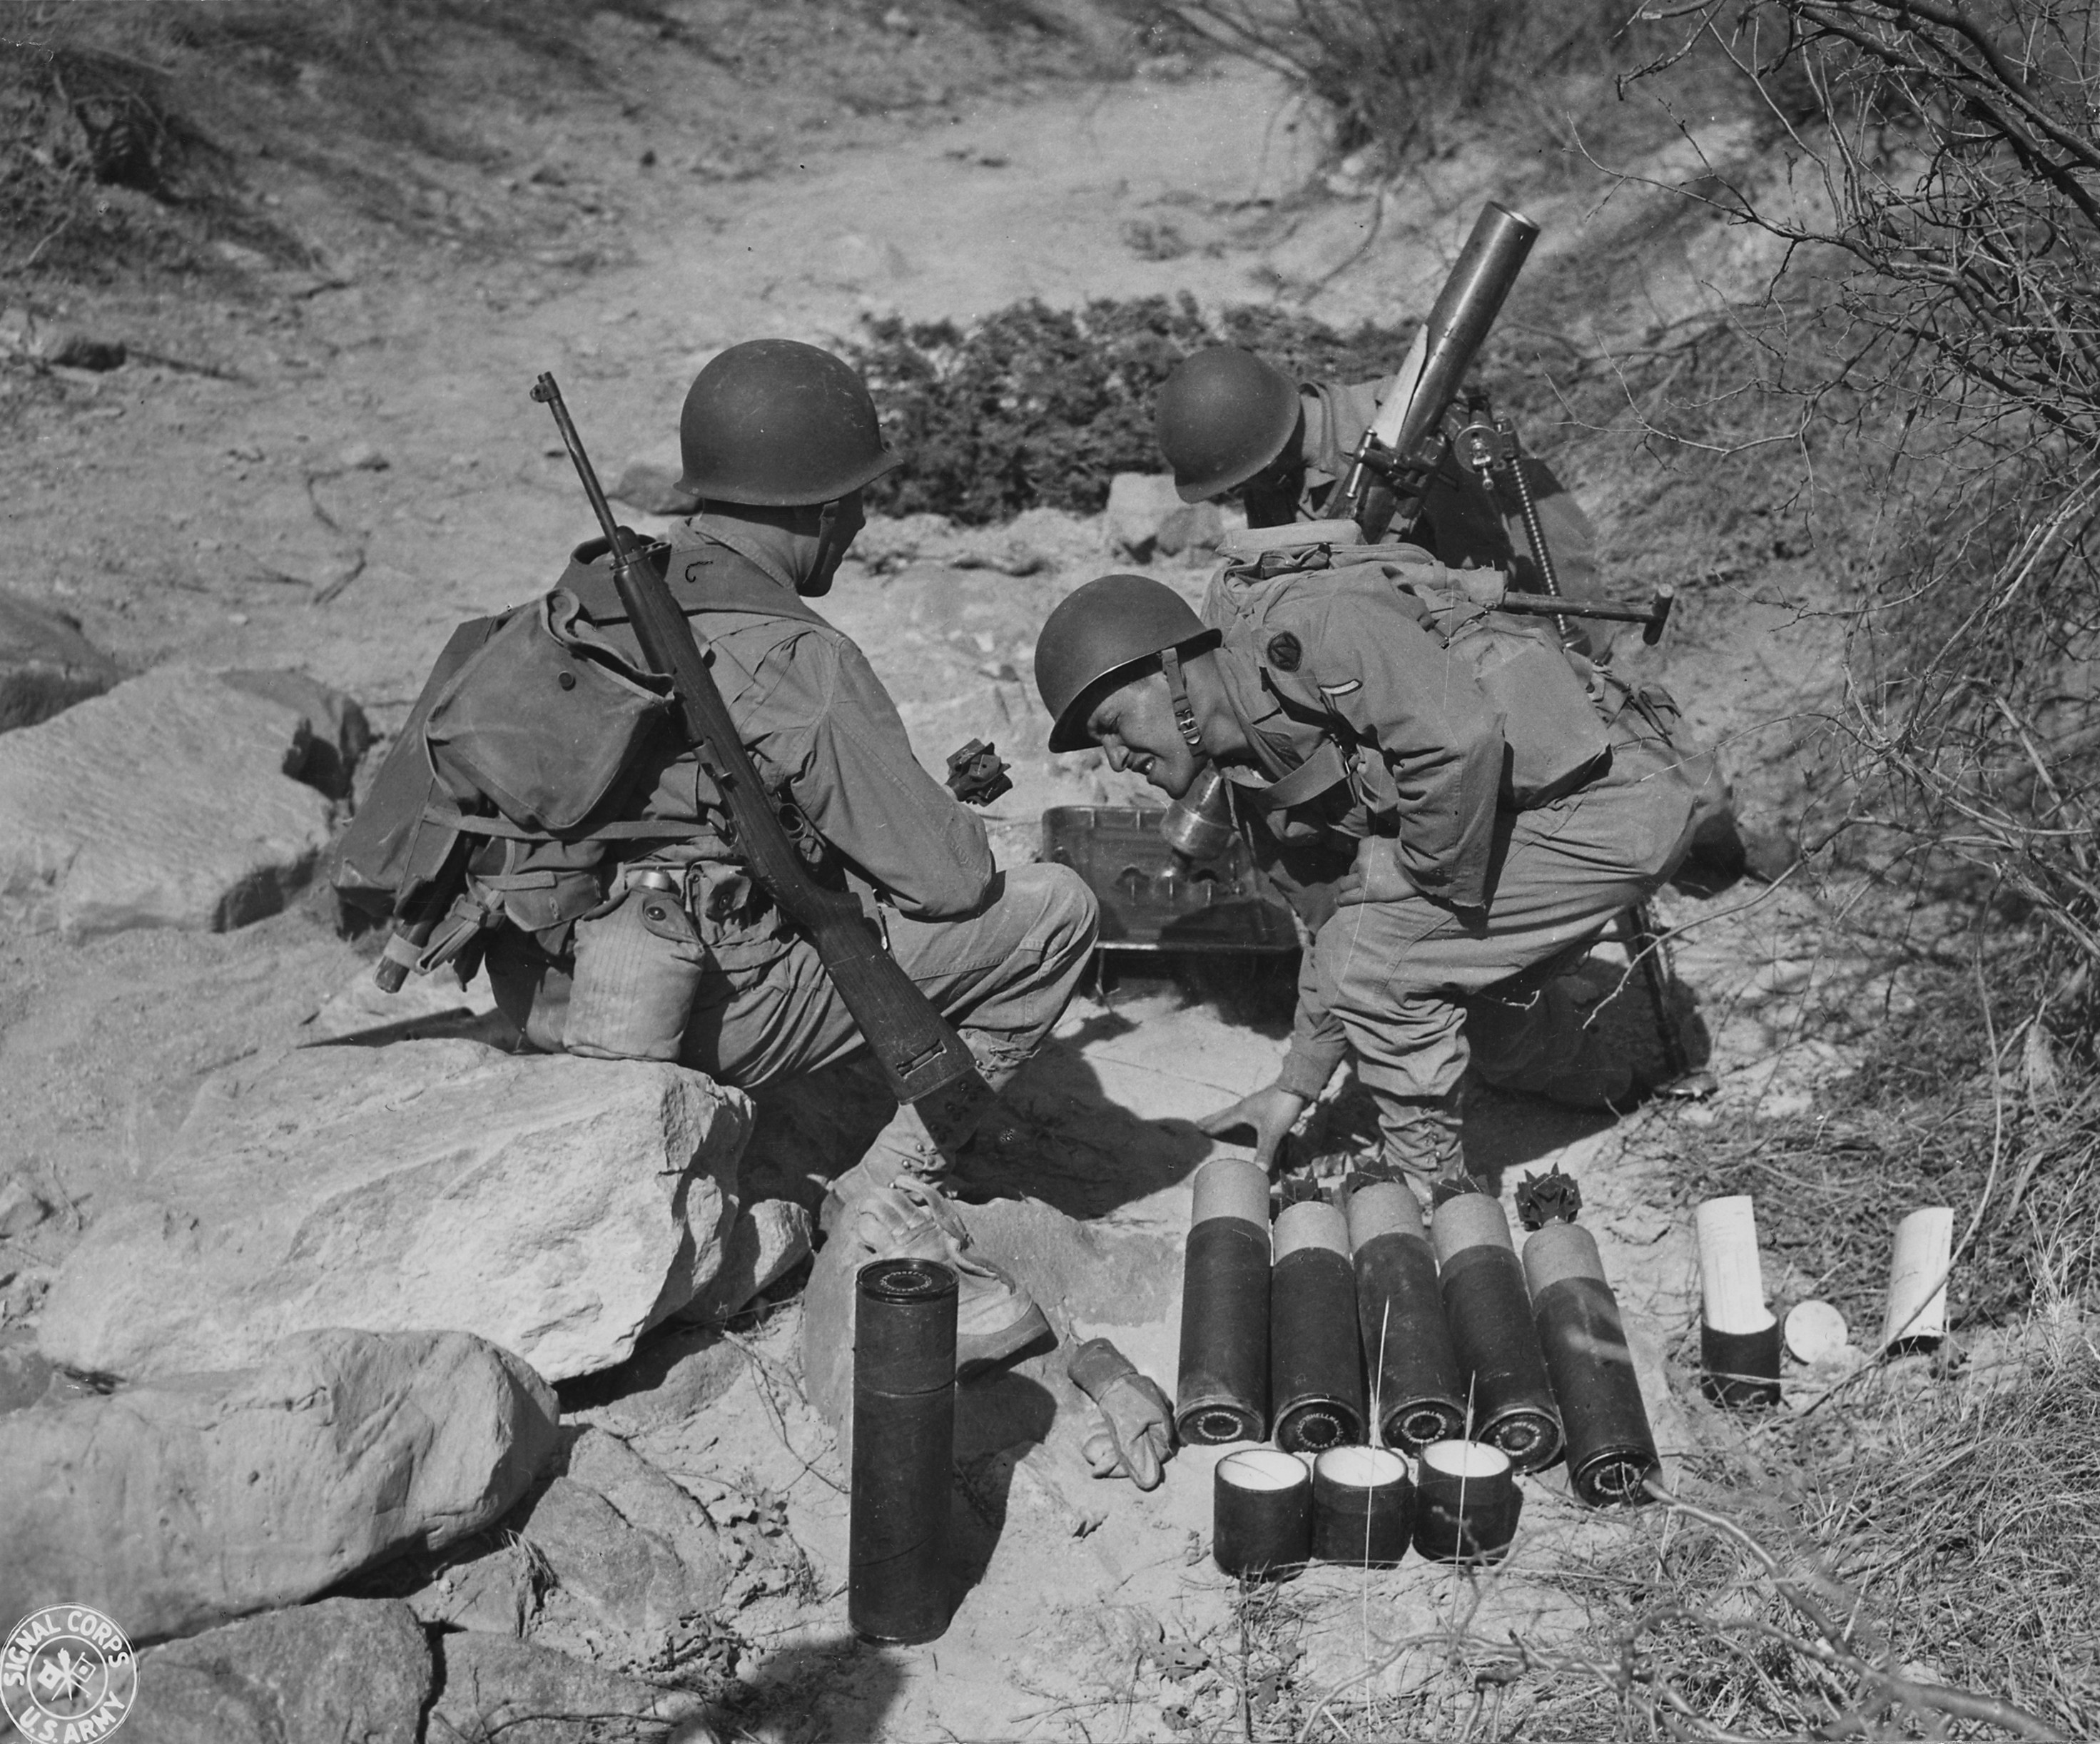 US Army troops training with 81mm M1 mortar, Camp Carson, Colorado, United States, 24 Apr 1943; note M1 Carbine